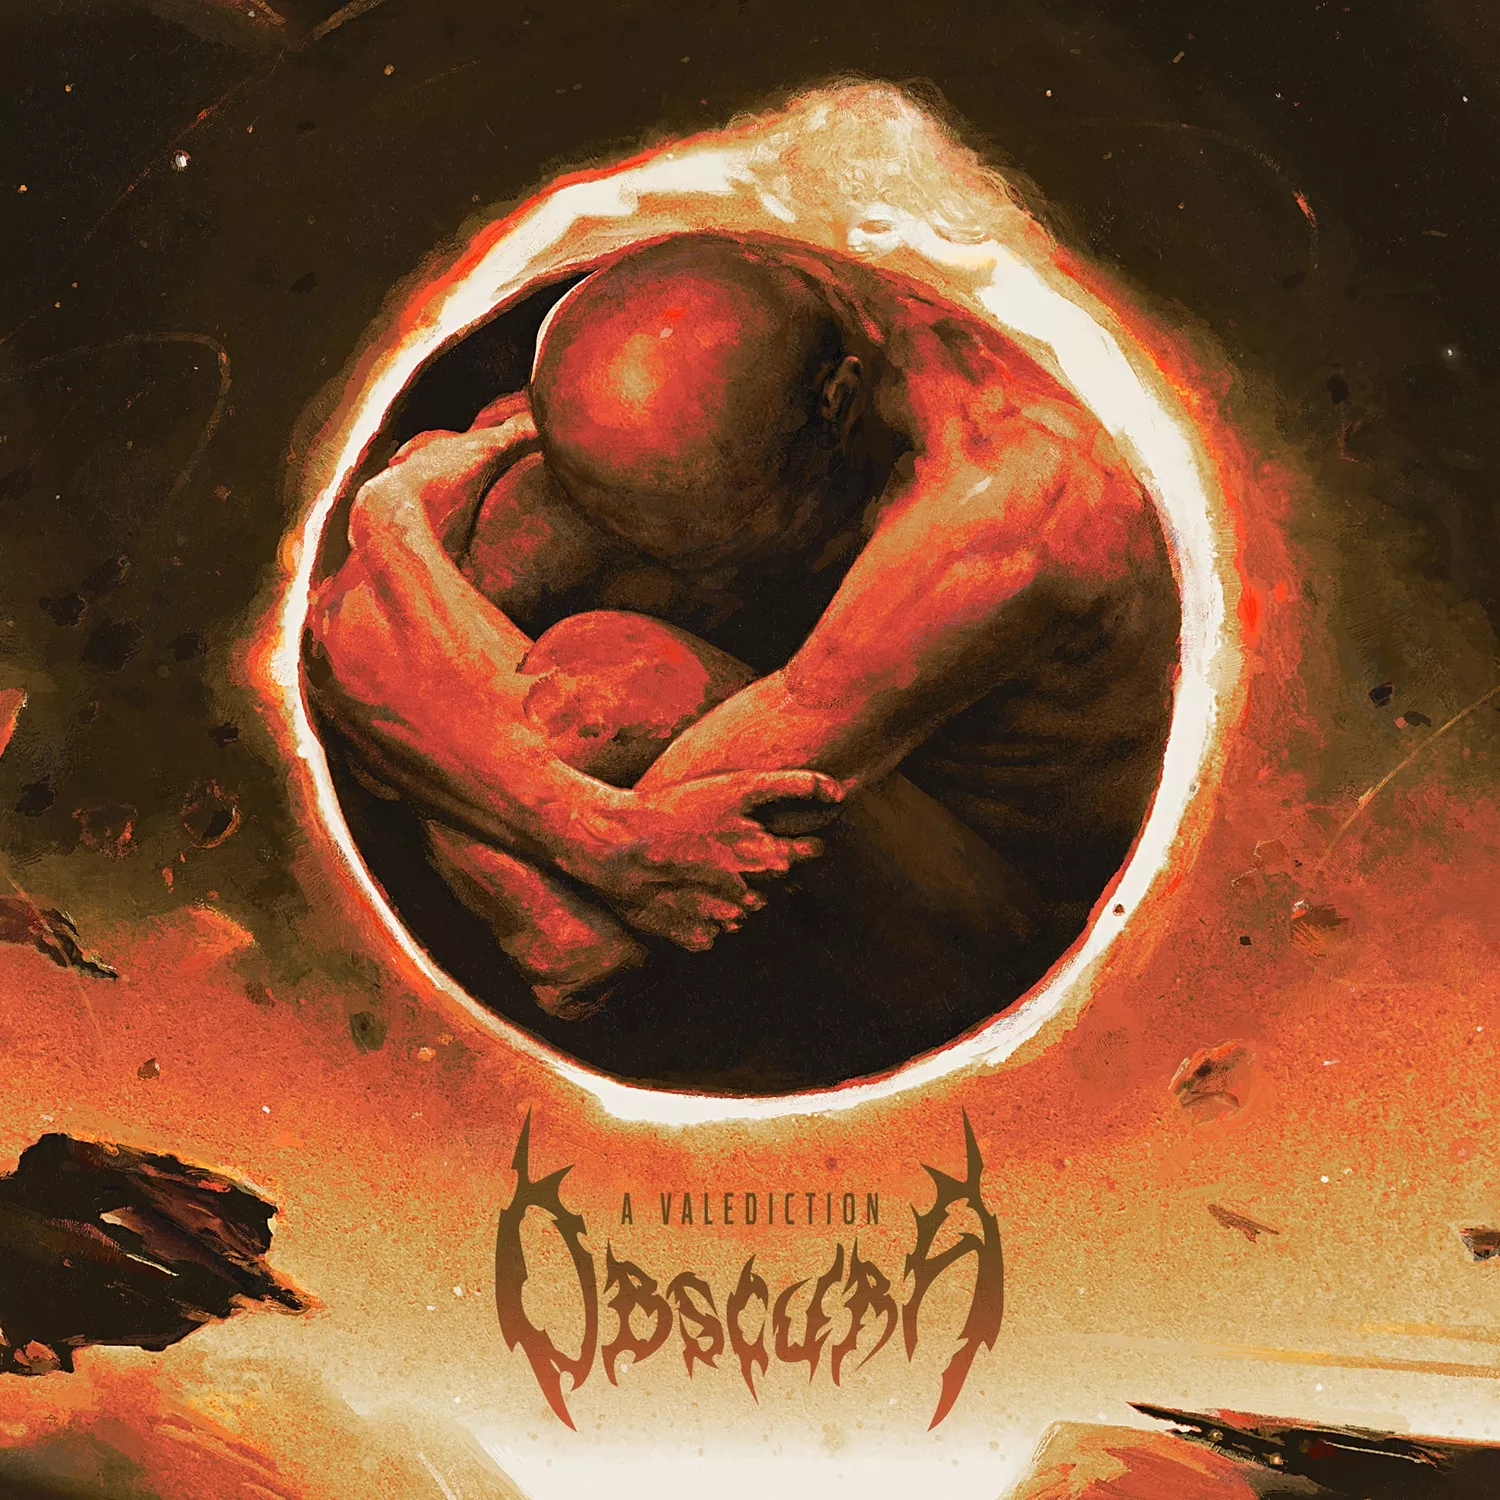 A Valediction - Obscura